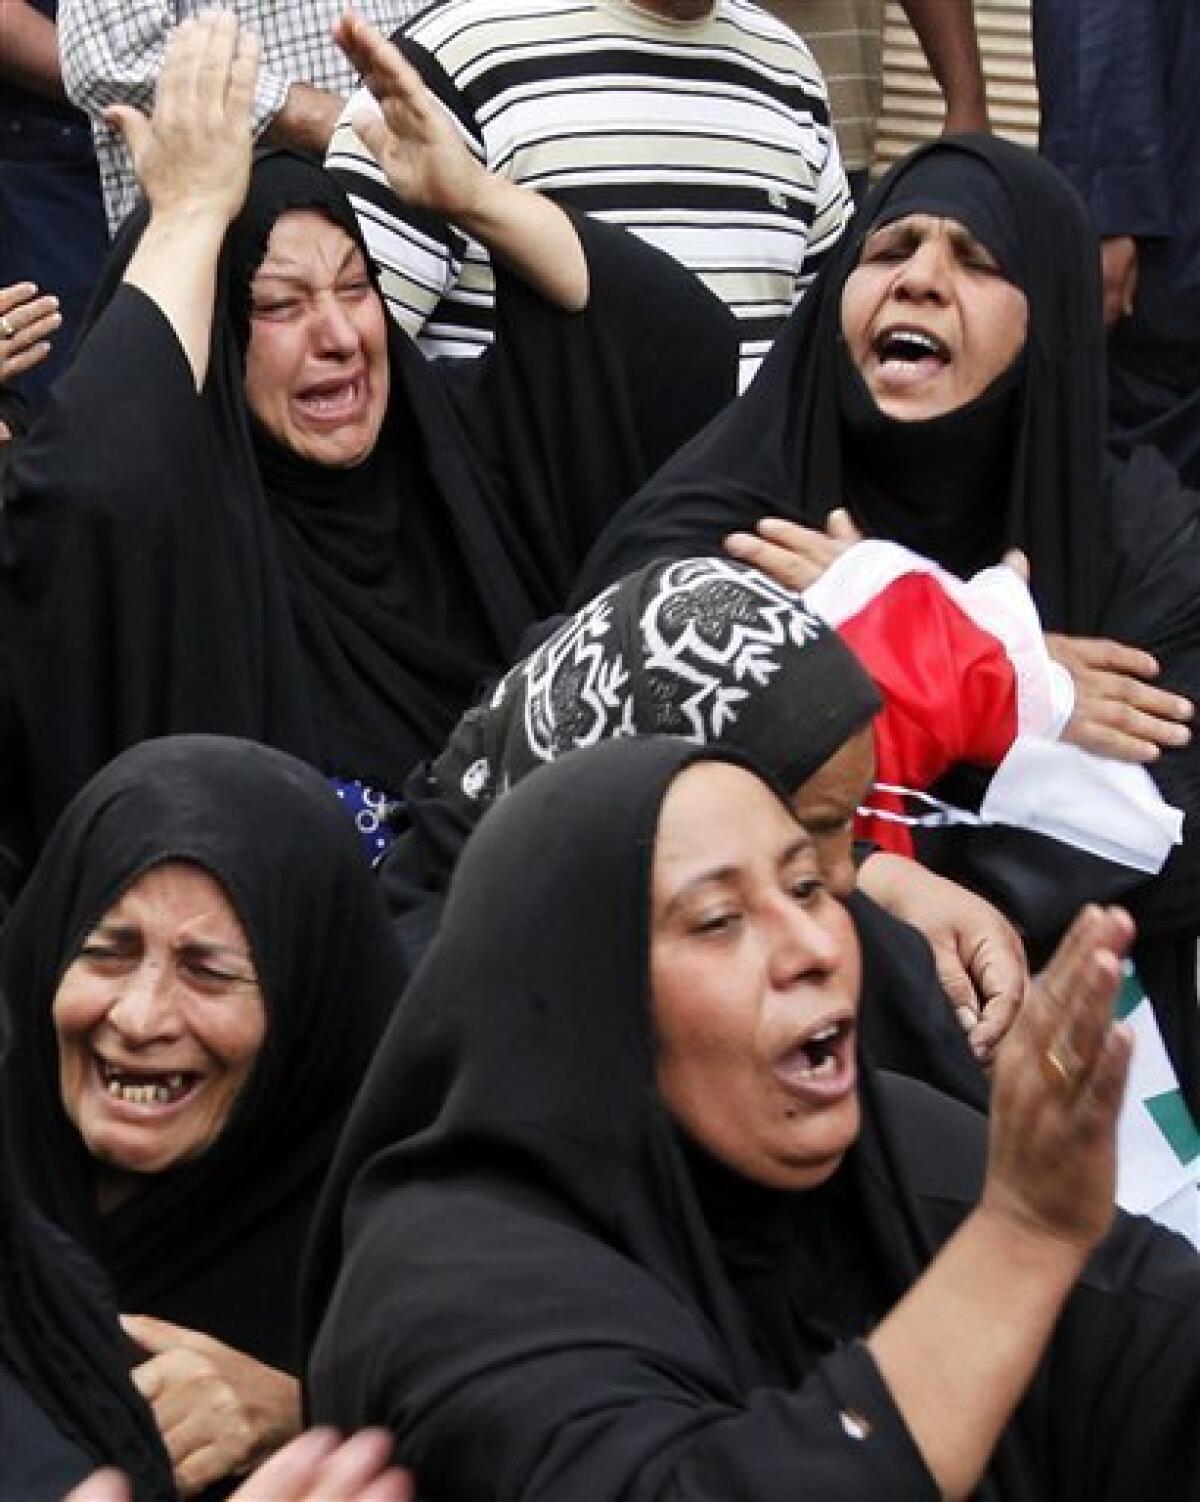 Family members mourn during a funeral for Hashem Mohammed in central Baghdad, Iraq, Wednesday, April 7, 2010. Hundreds of people are gathering for funerals after bombs ripped through apartment buildings and a market in Baghdad on Tuesday. (AP Photo/Hadi Mizban)